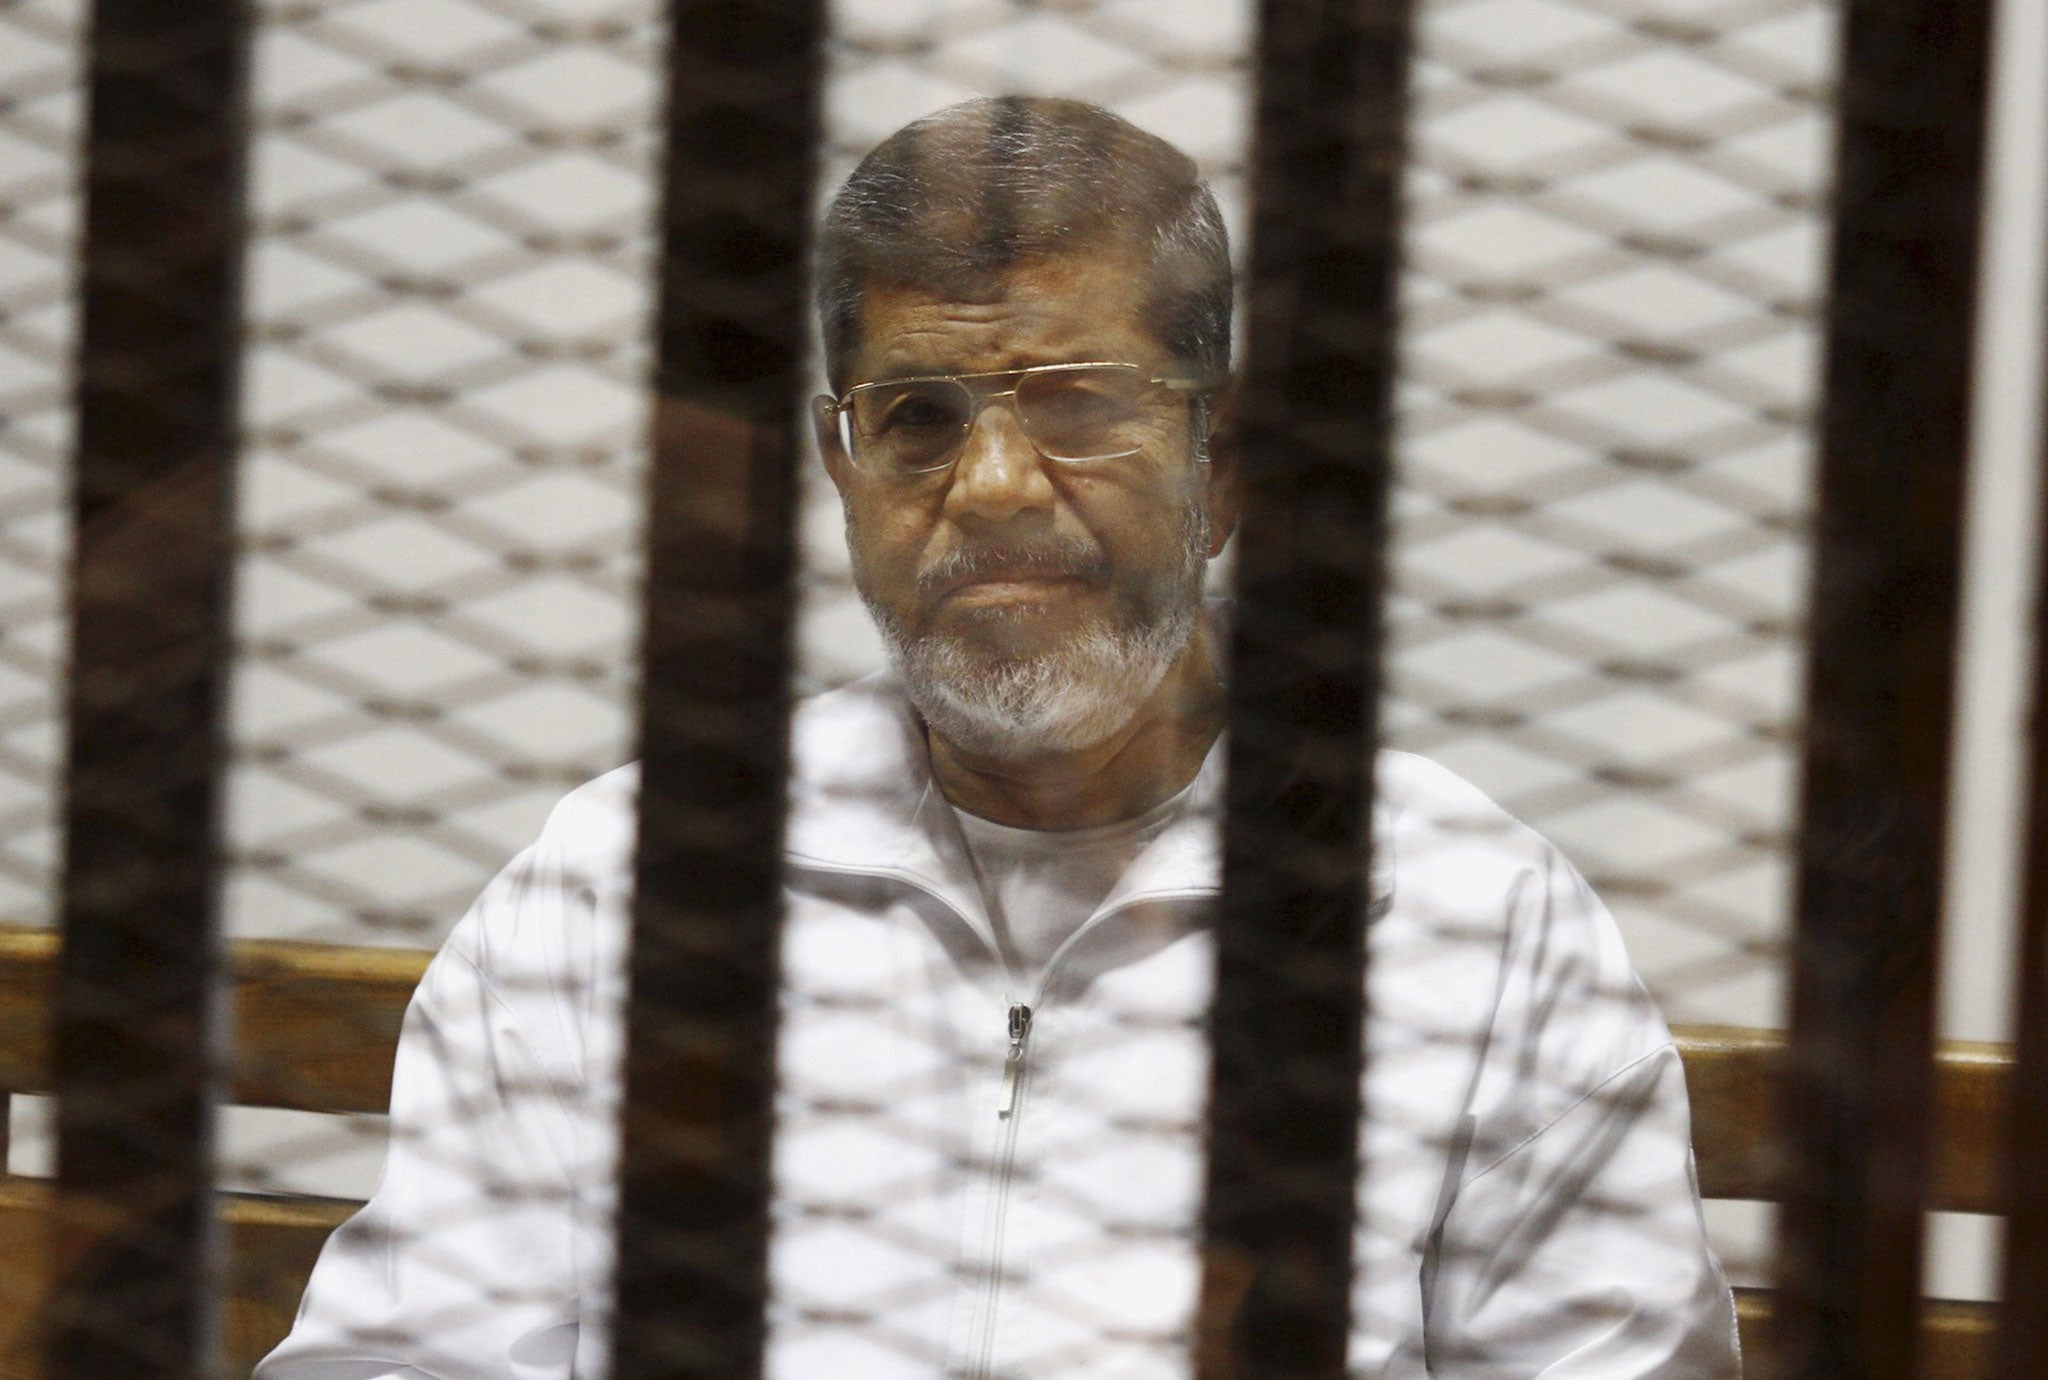 Mohamed Morsi has been sentenced to death